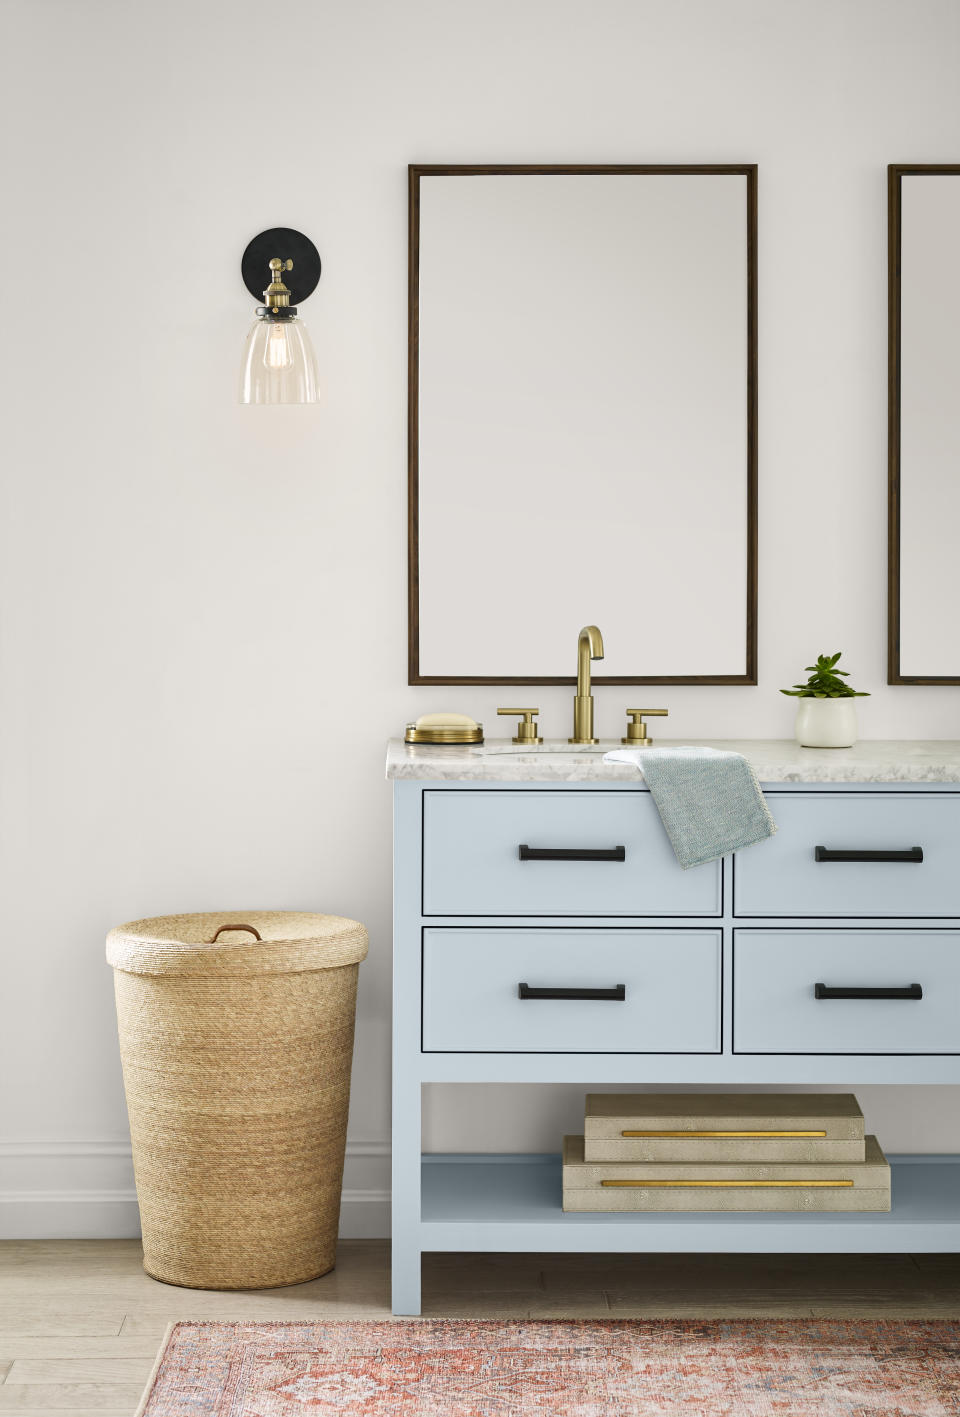 A bathroom with white walls and a double vanity painted in a pale pastel blue